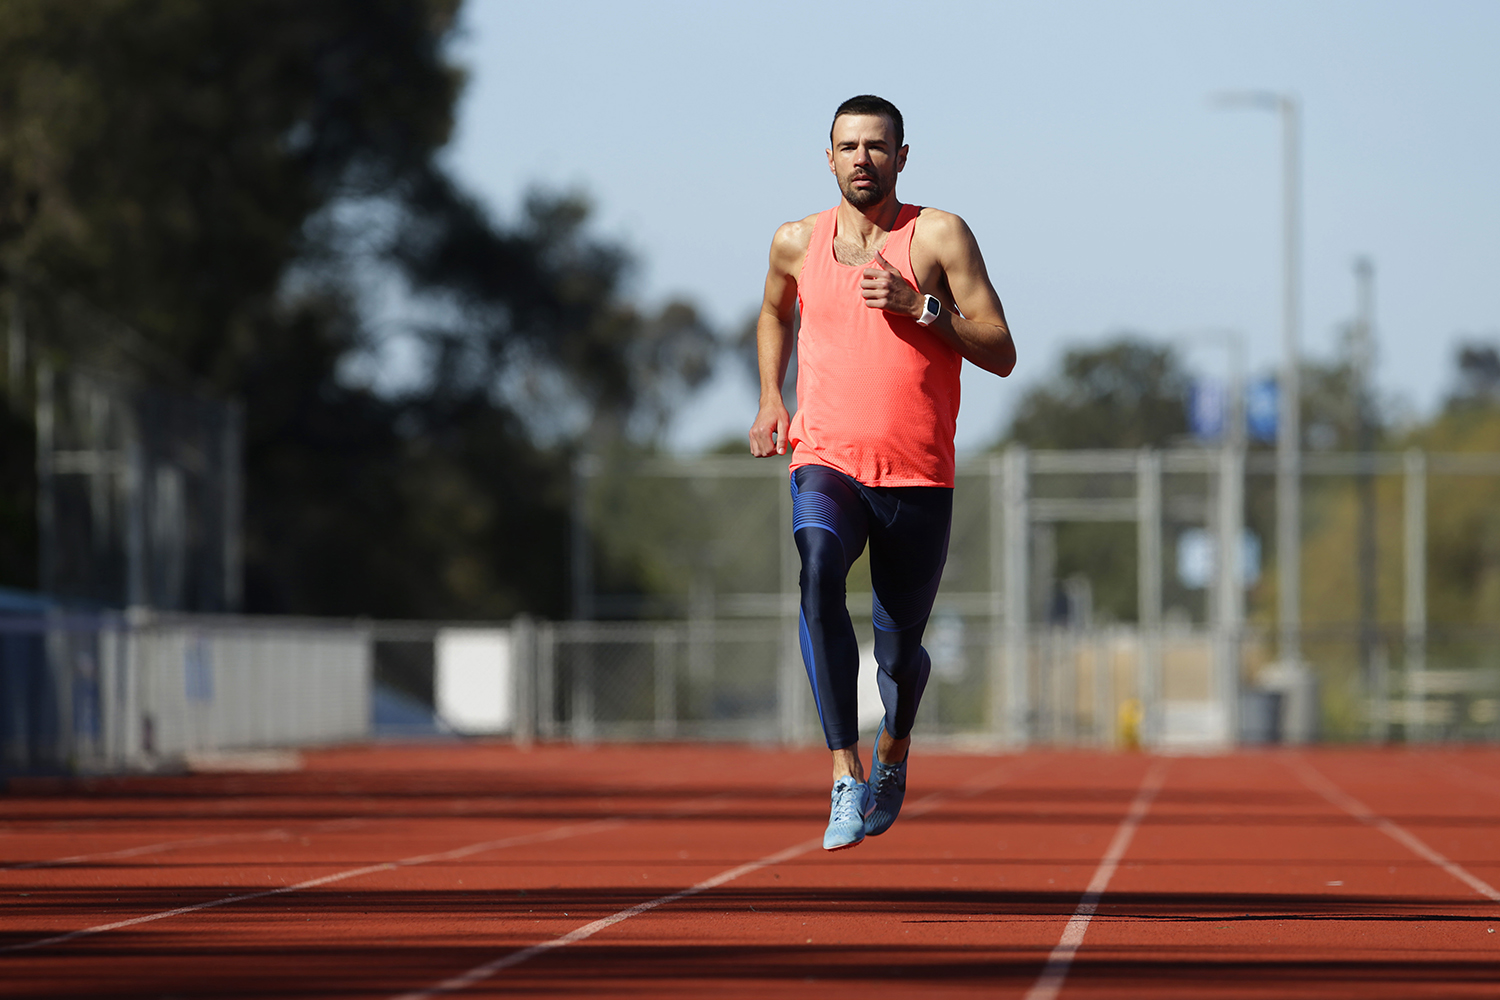 A male runner trains on a track on a sunny day in San Diego, California. San Diego is one of the top places for runners to train in the United States because of its low precipitation and mild climate